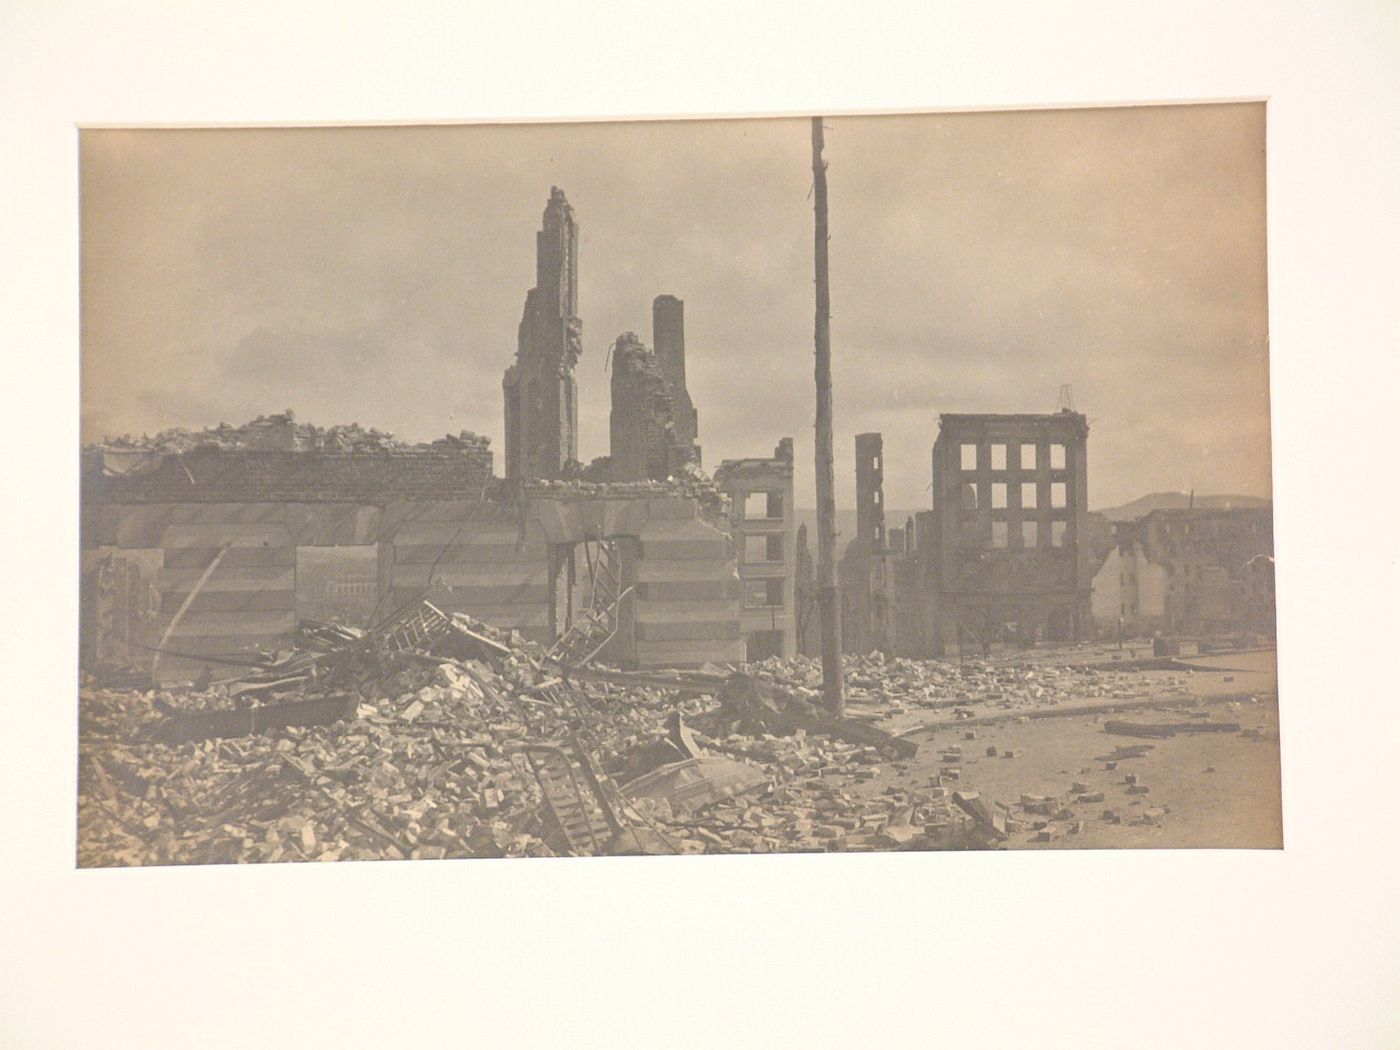 General view of the aftermath of the 1906 earthquake and fire, San Francisco, California